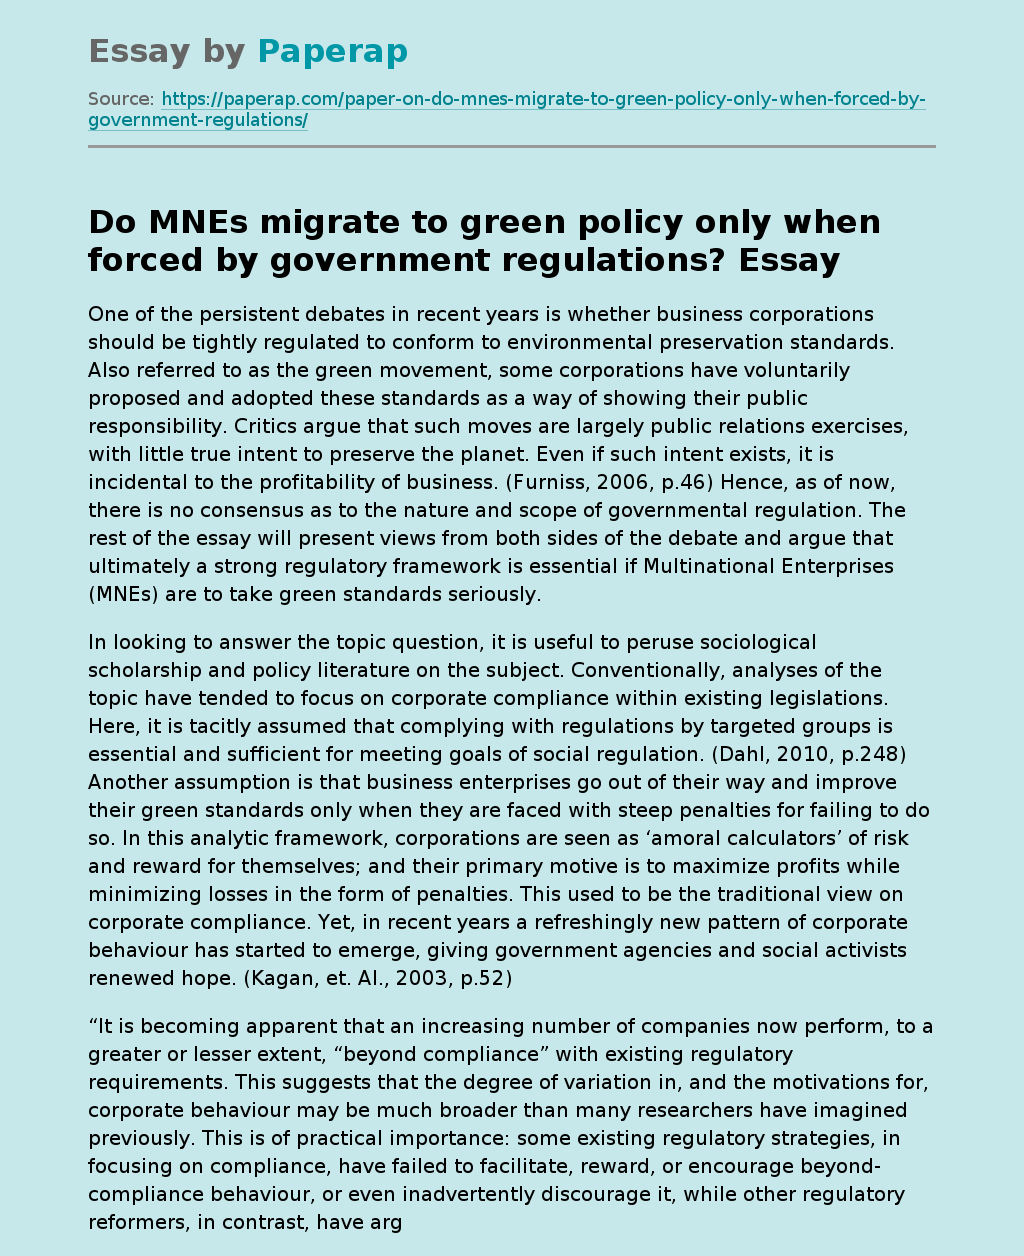 Do MNEs Migrate to Green Policy only when forced by Government Regulations?